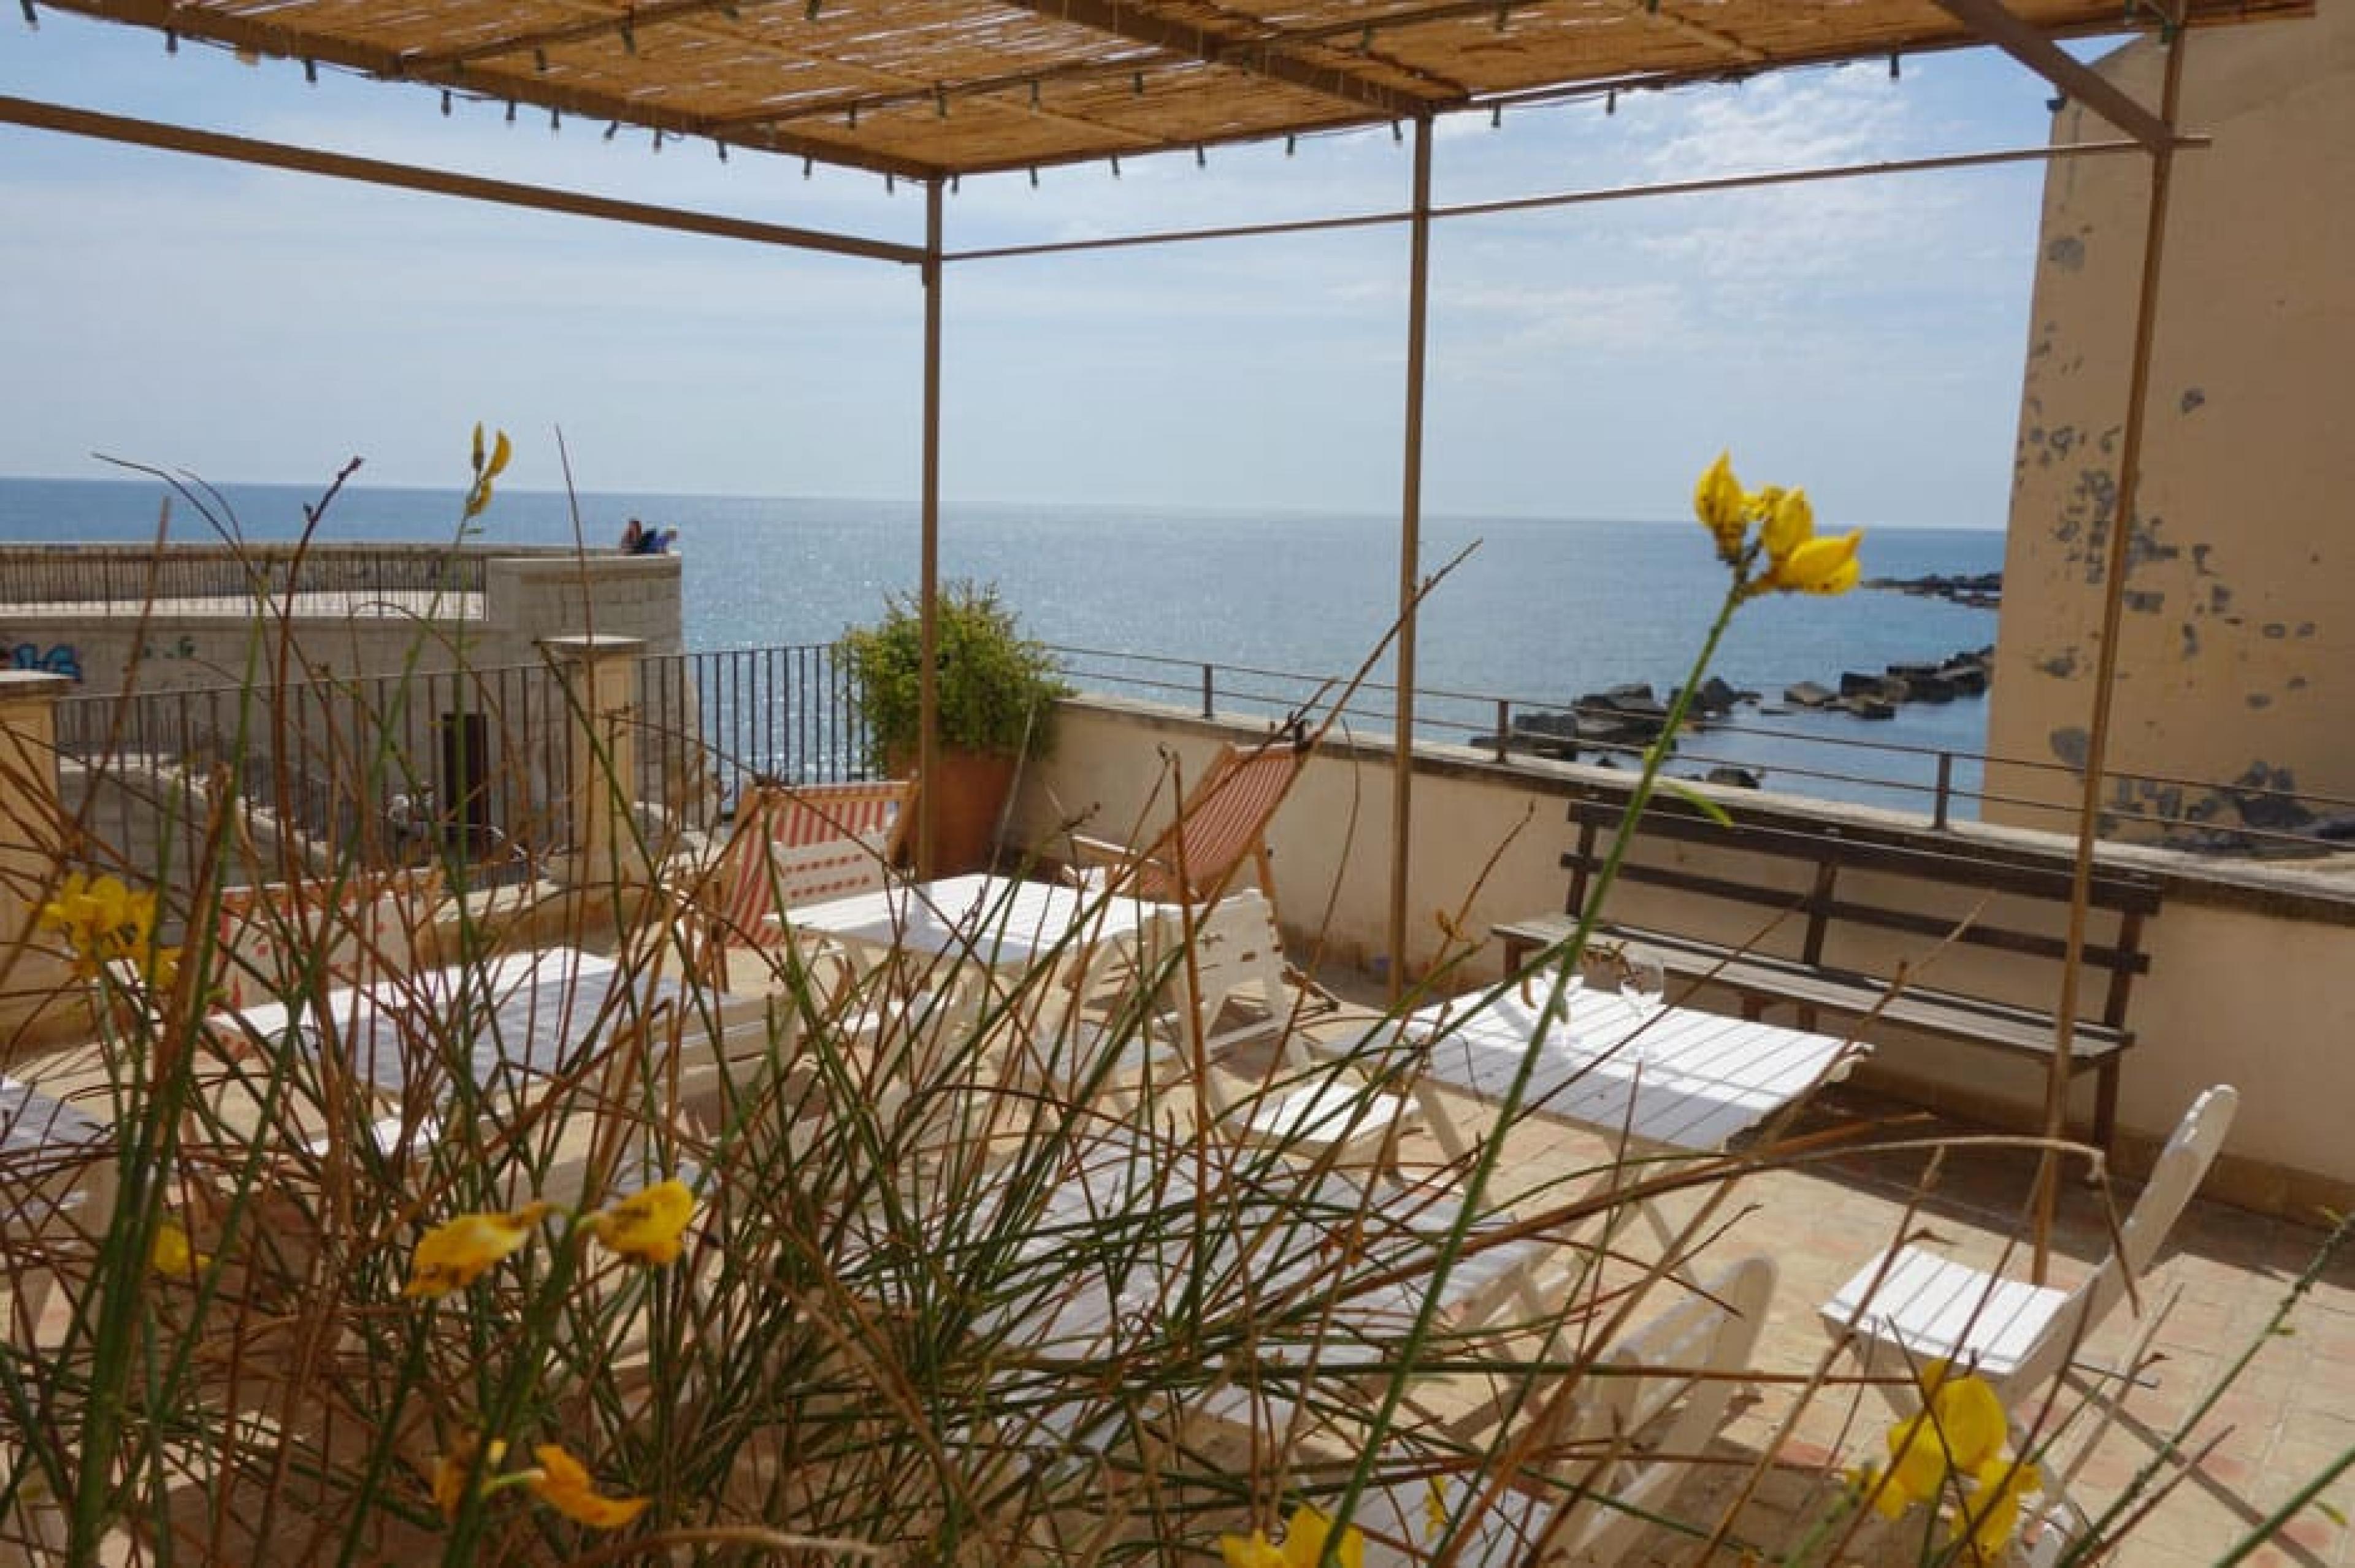 View from Terrace - Hotel Gutkowski, Sicily, Italy